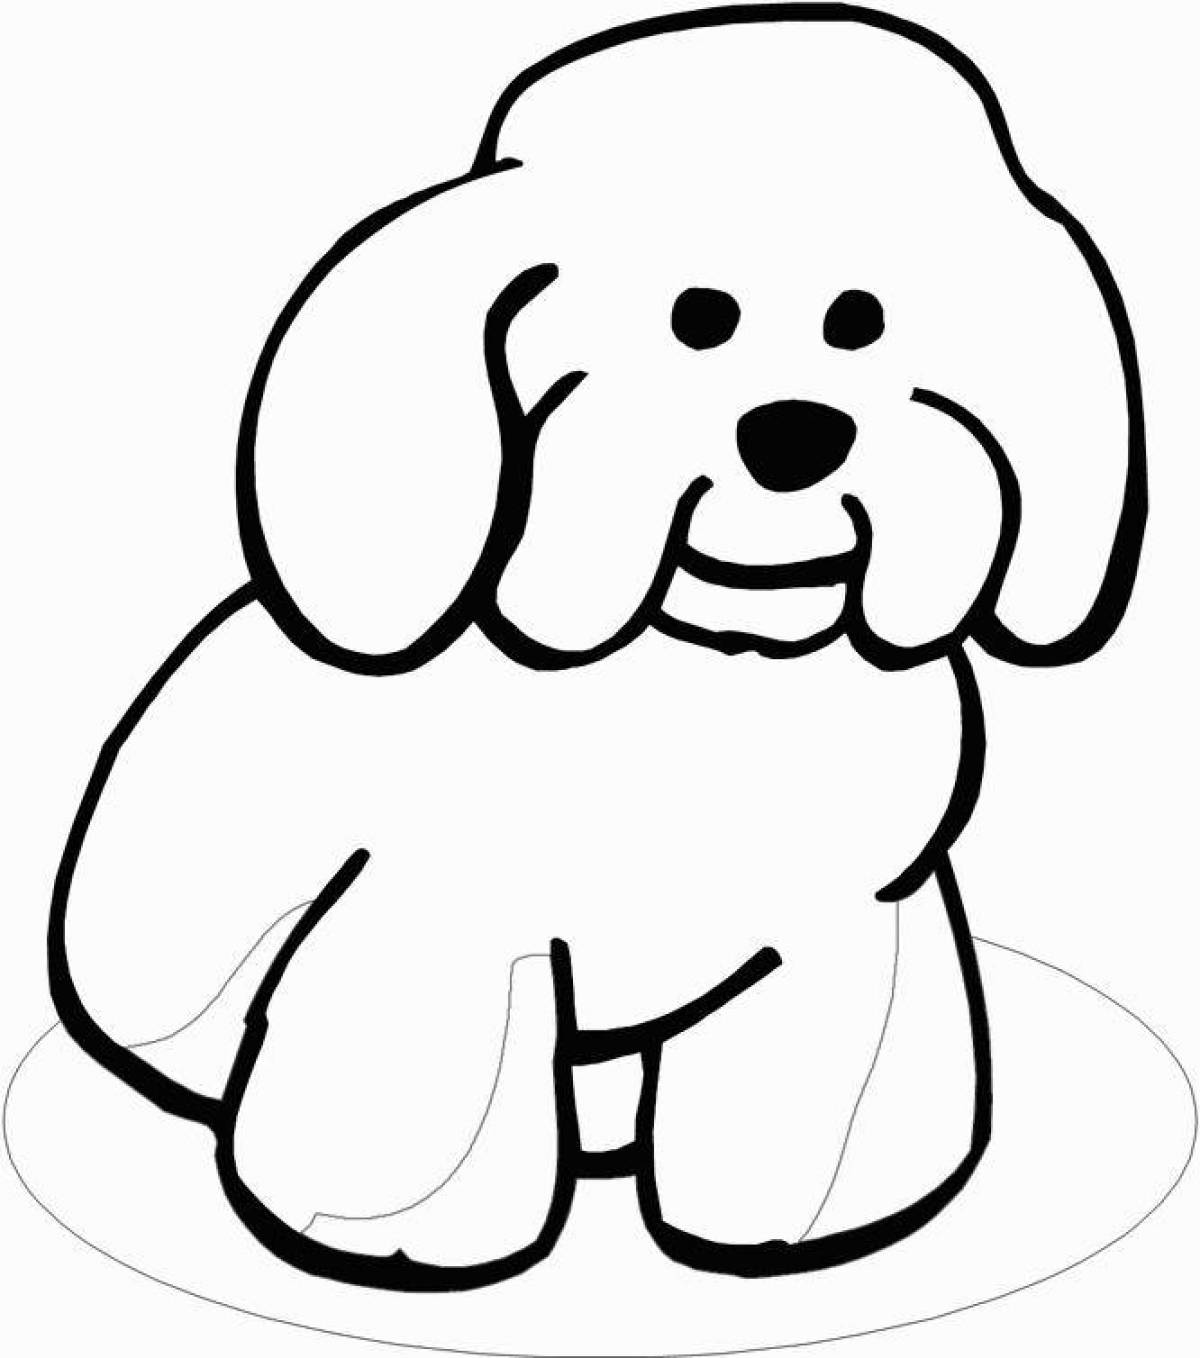 Outdoor coloring dog for children 3-4 years old